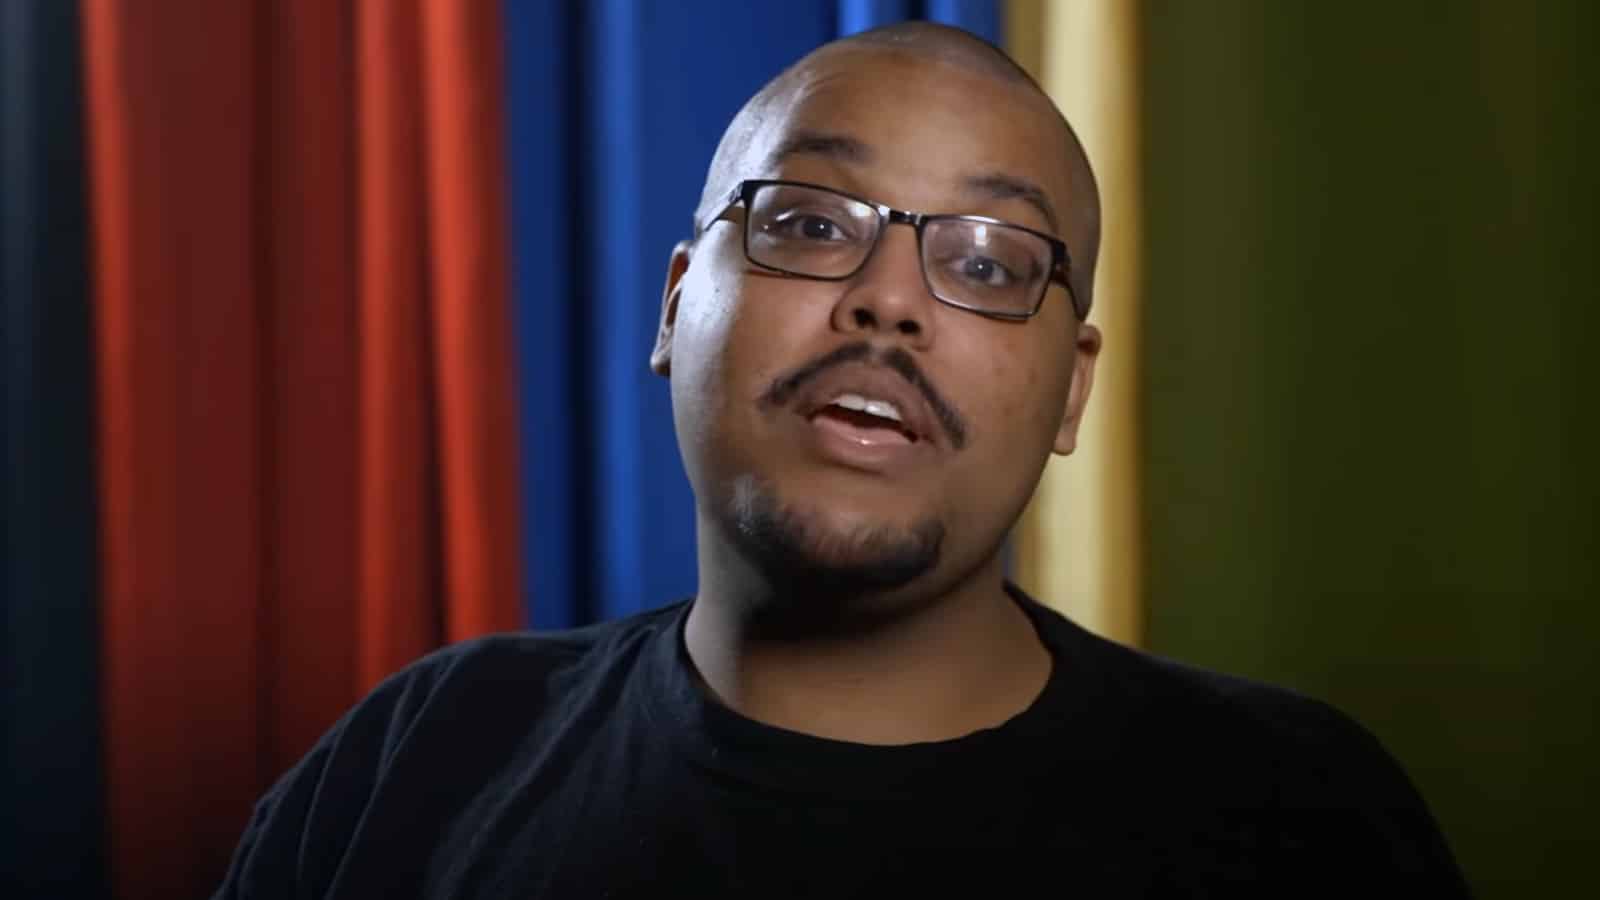 Sky Williams appears before the Super Smash Bros Sky House allegations come to light in July 2020.